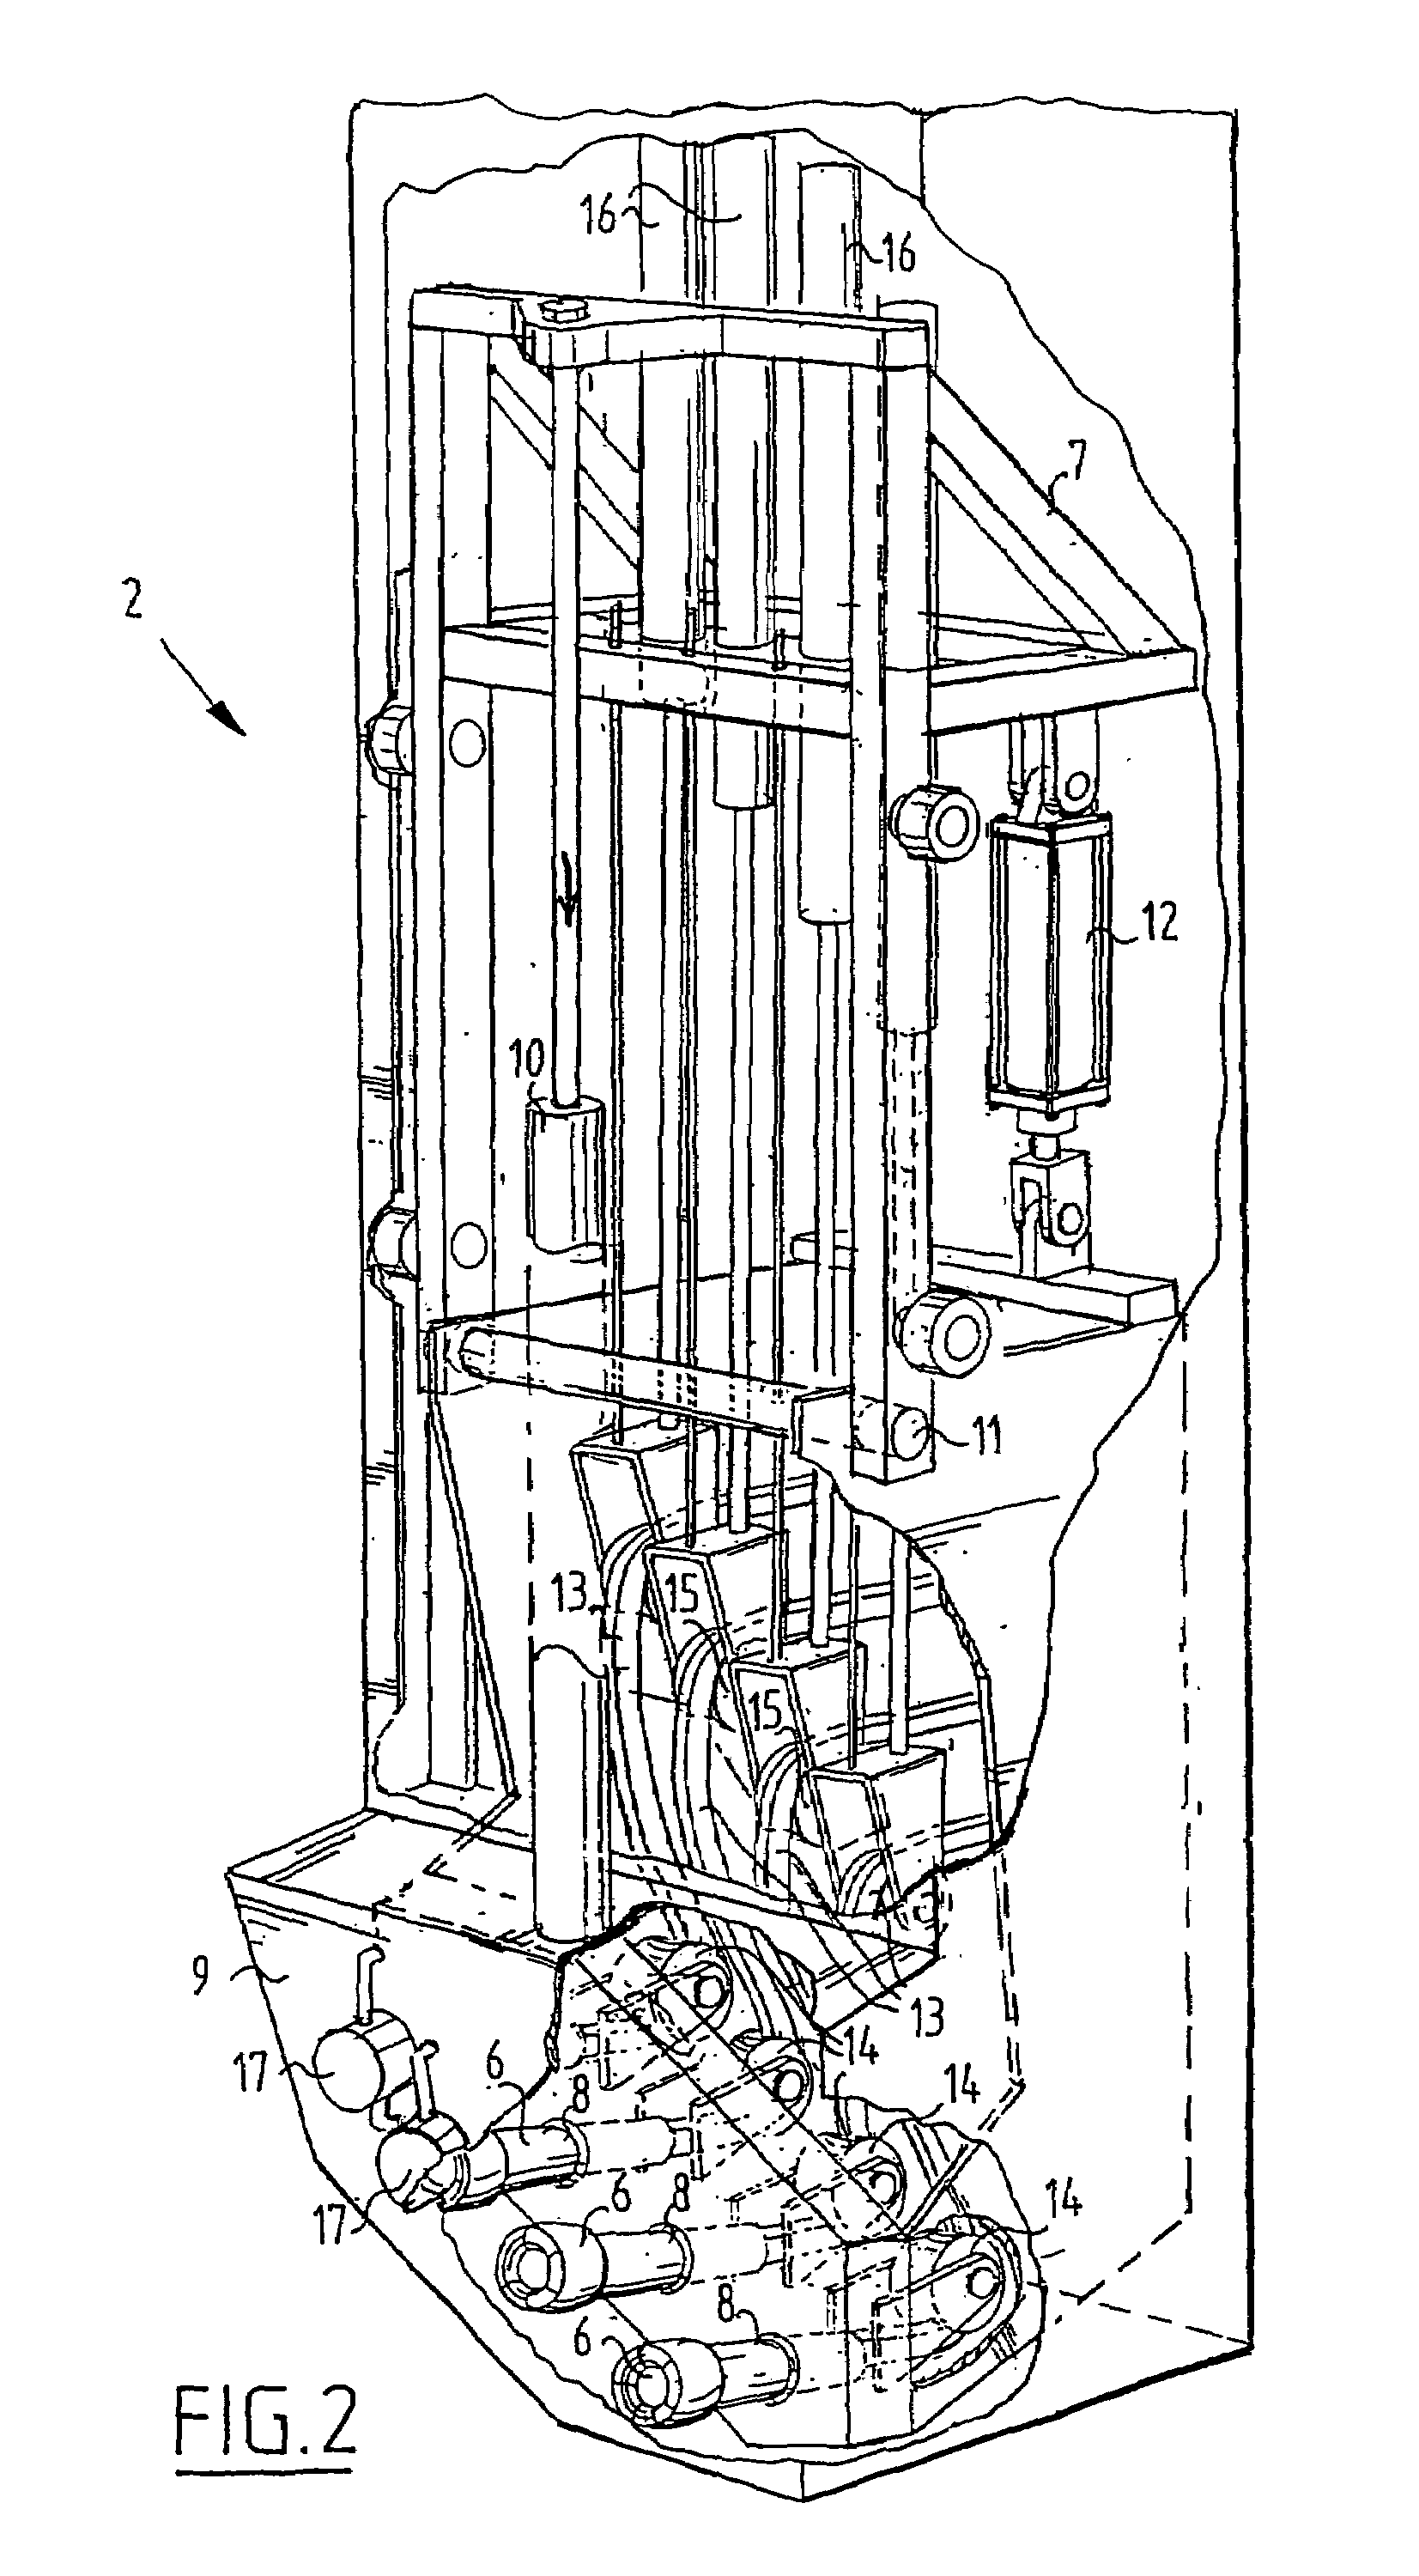 Milking apparatus and holder for receiving teat cups